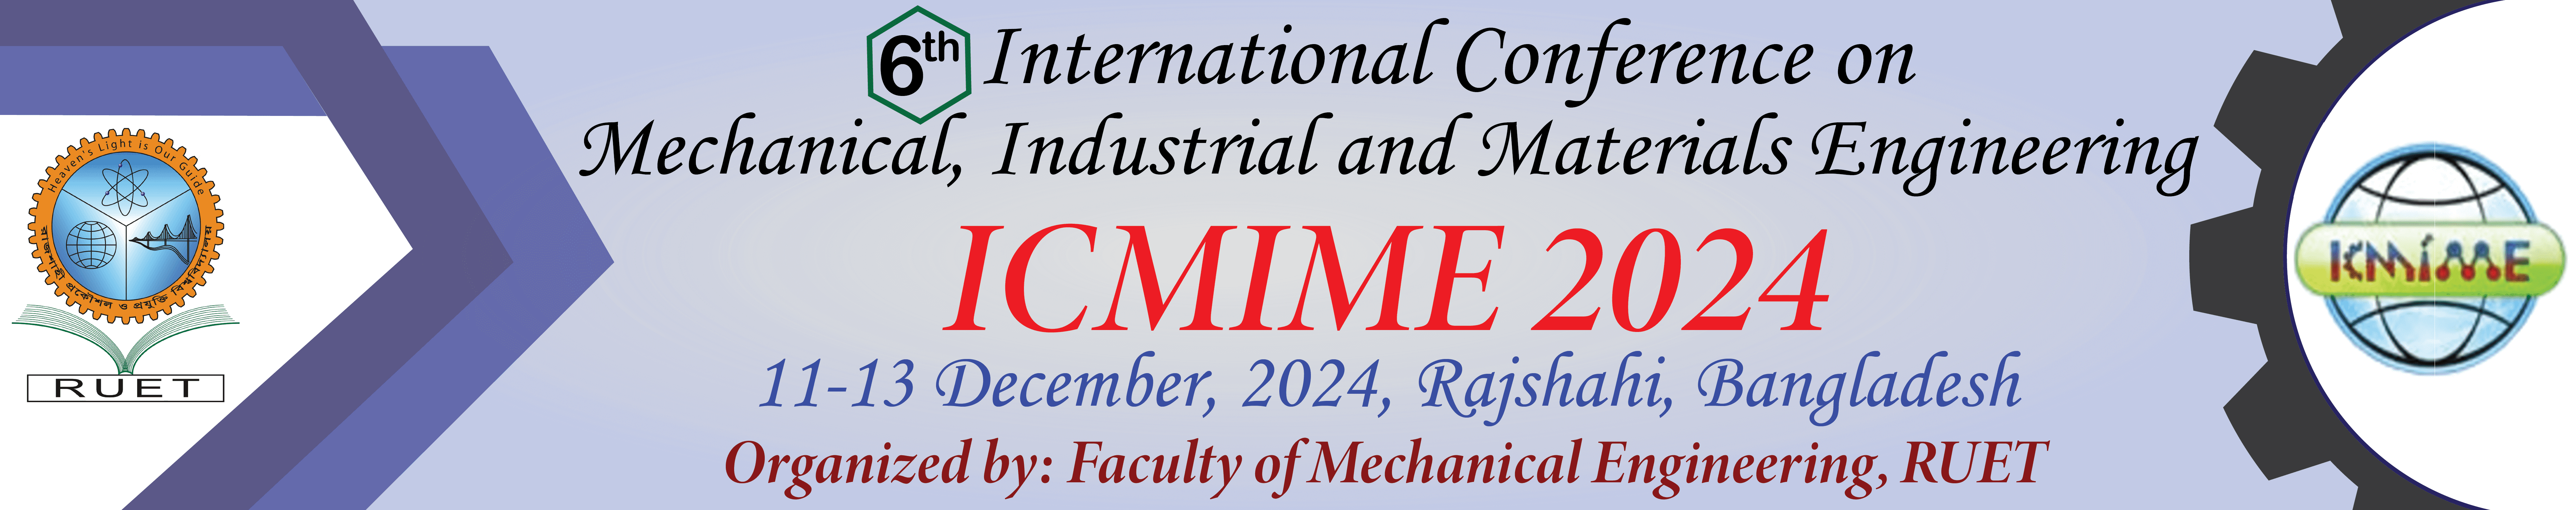 International Conference on Mechanical, Industrial and Materials Engineering banner